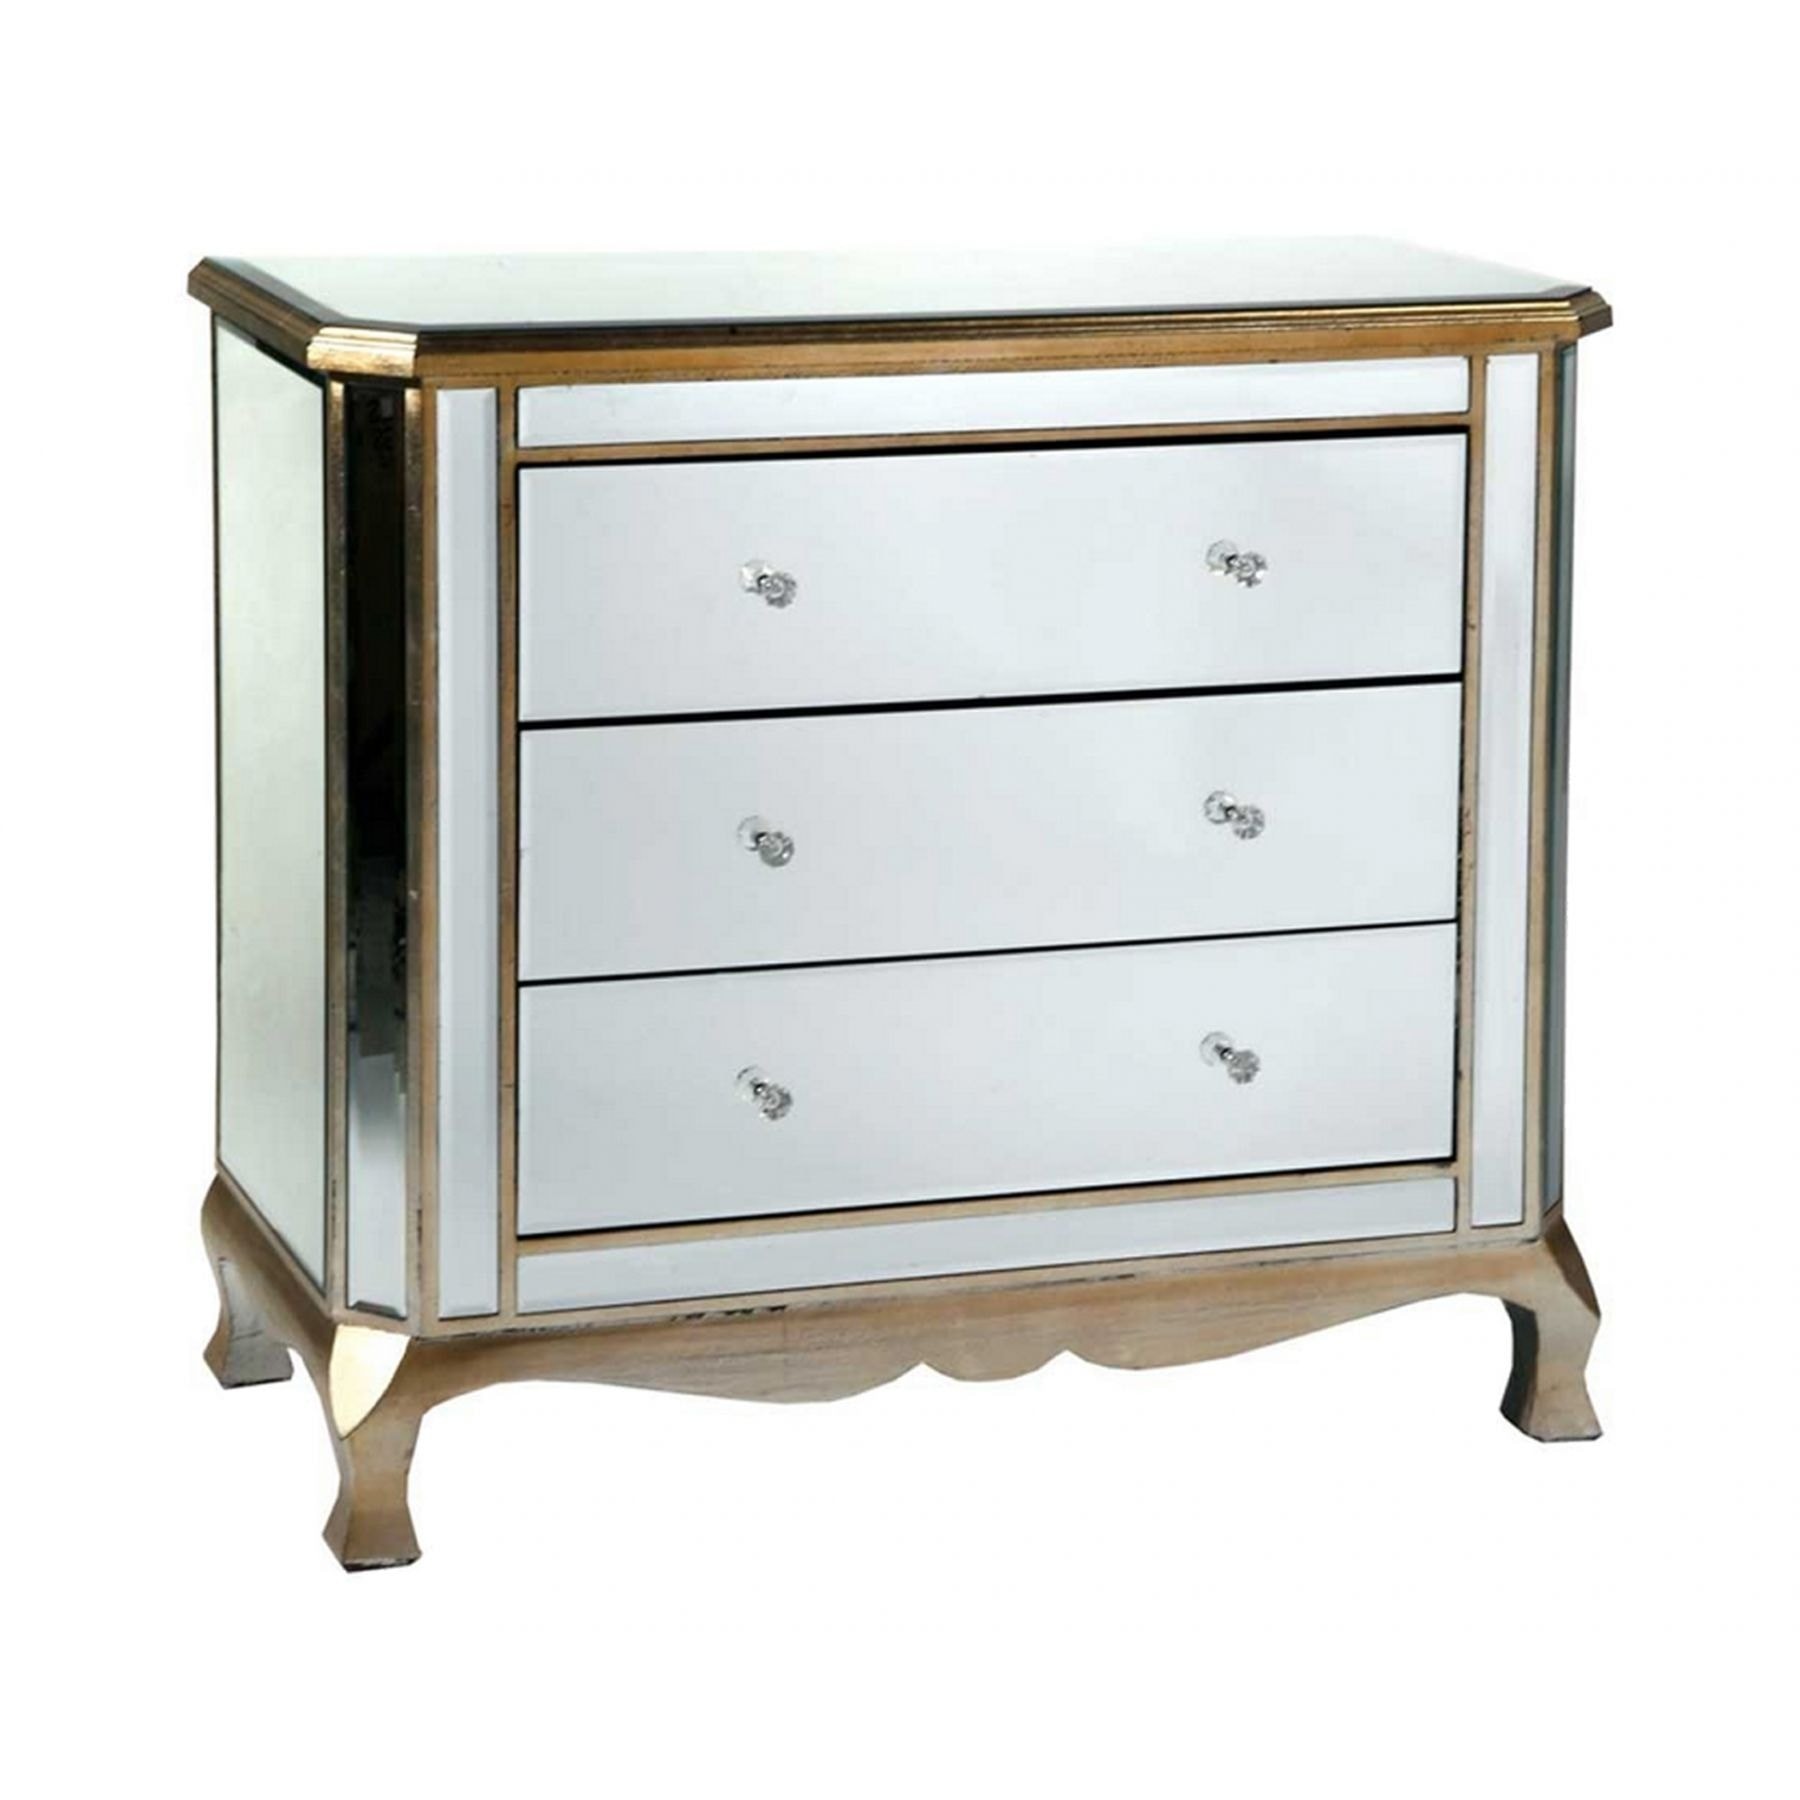 Mirrored chest of drawers gold trim venetian furniture